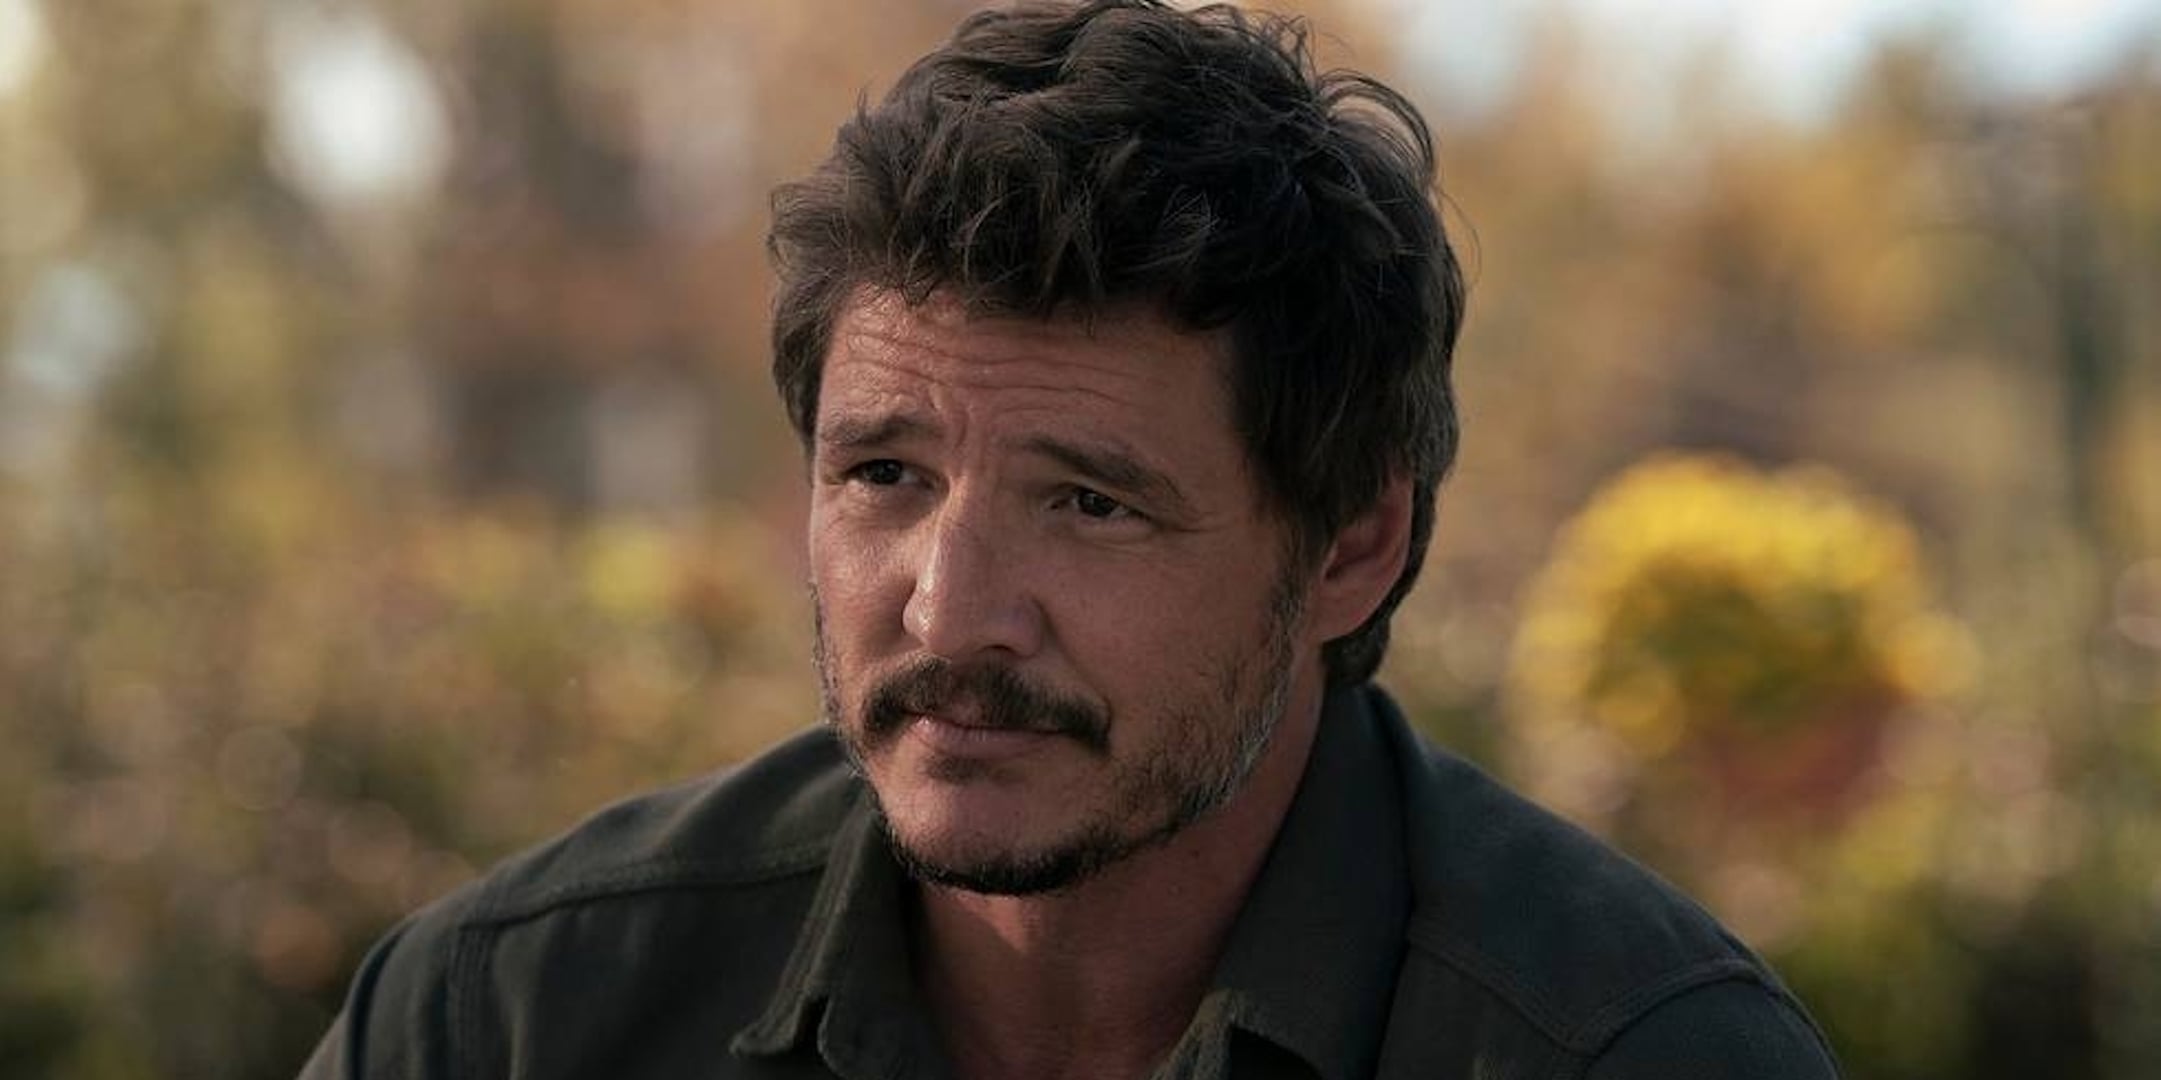 The Equalizer 2' Gave Us Pedro Pascal's Most Mysterious Role